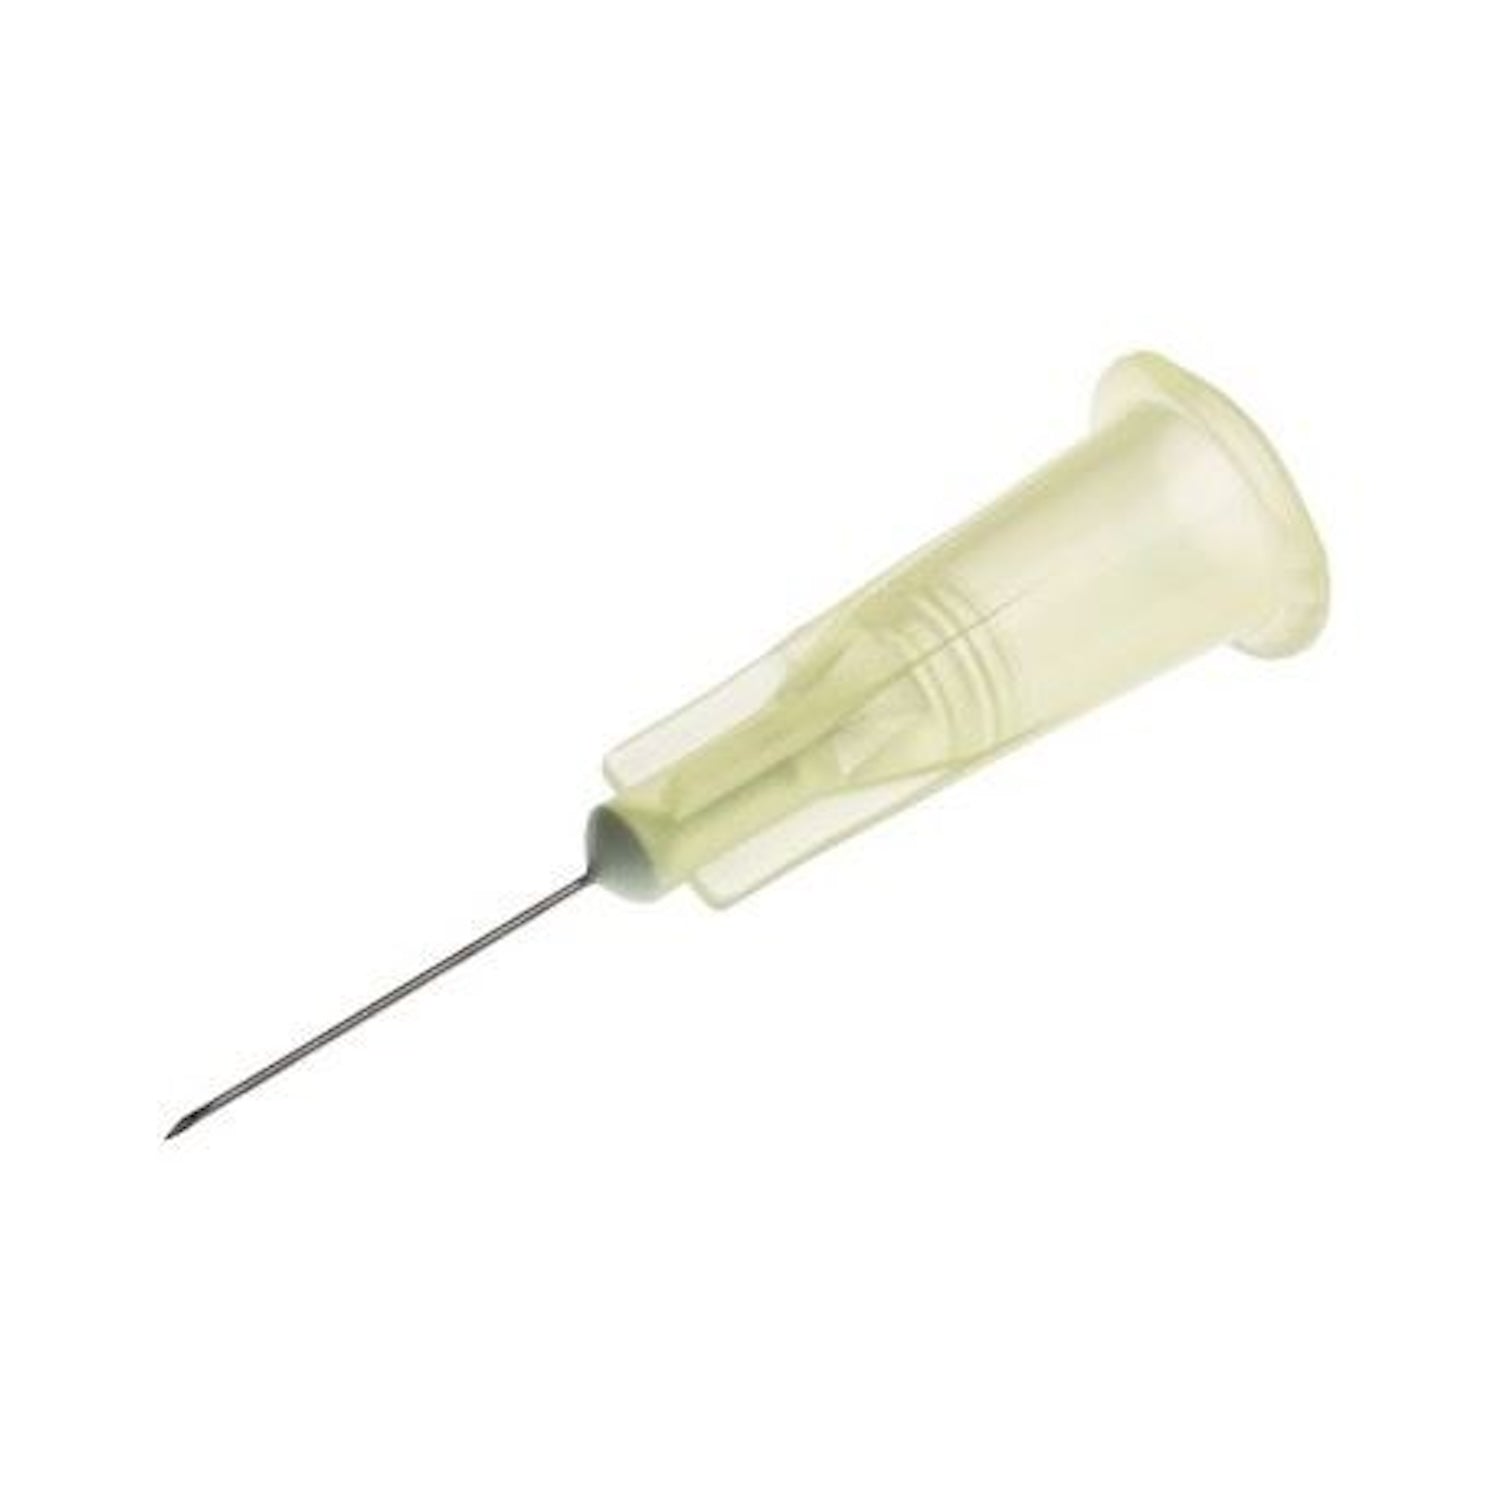 BD Hypodermic Needle | 30G x 1/2" Reg | Yellow | Pack of 100 Pieces